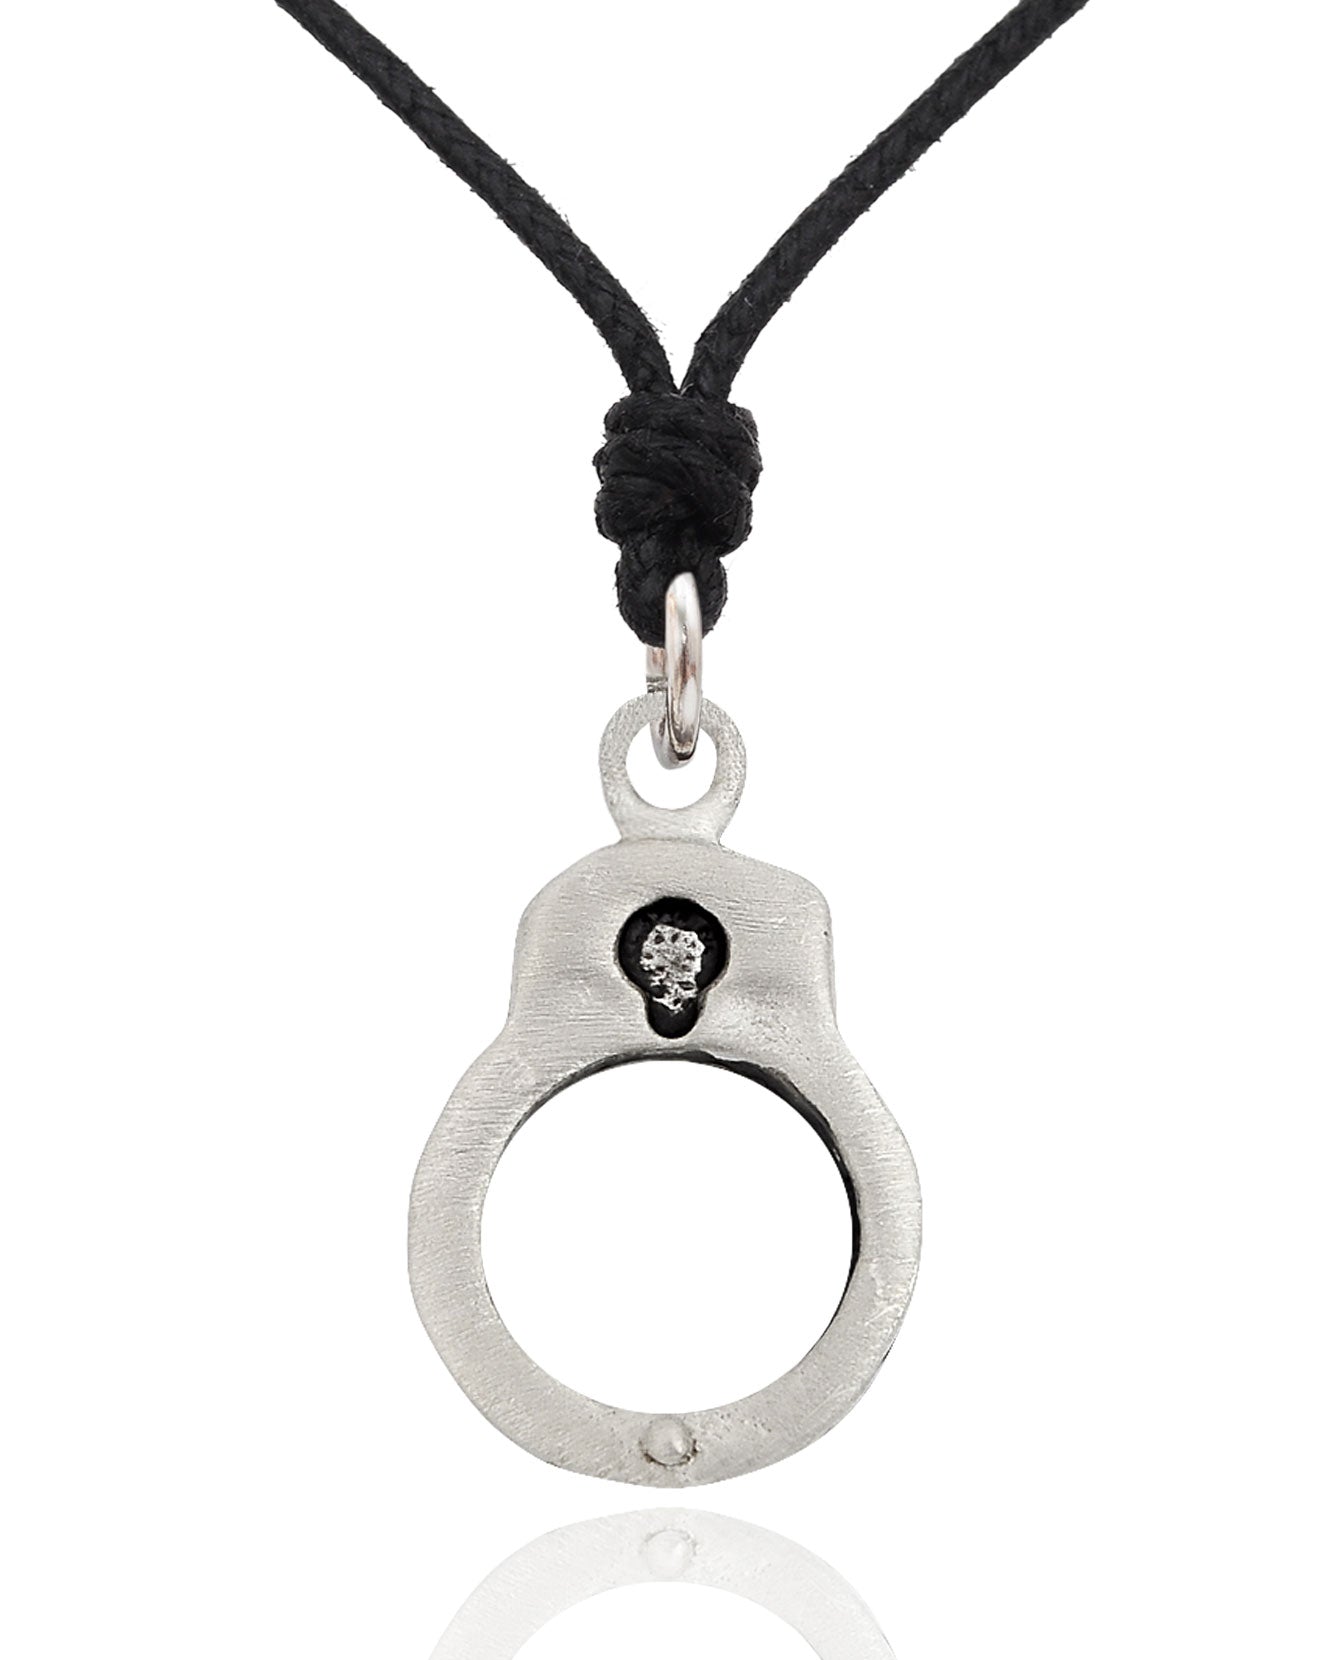 Small Handcuff Bondage Cop Silver Pewter Charm Necklace Pendant Jewelry With Cotton Cord